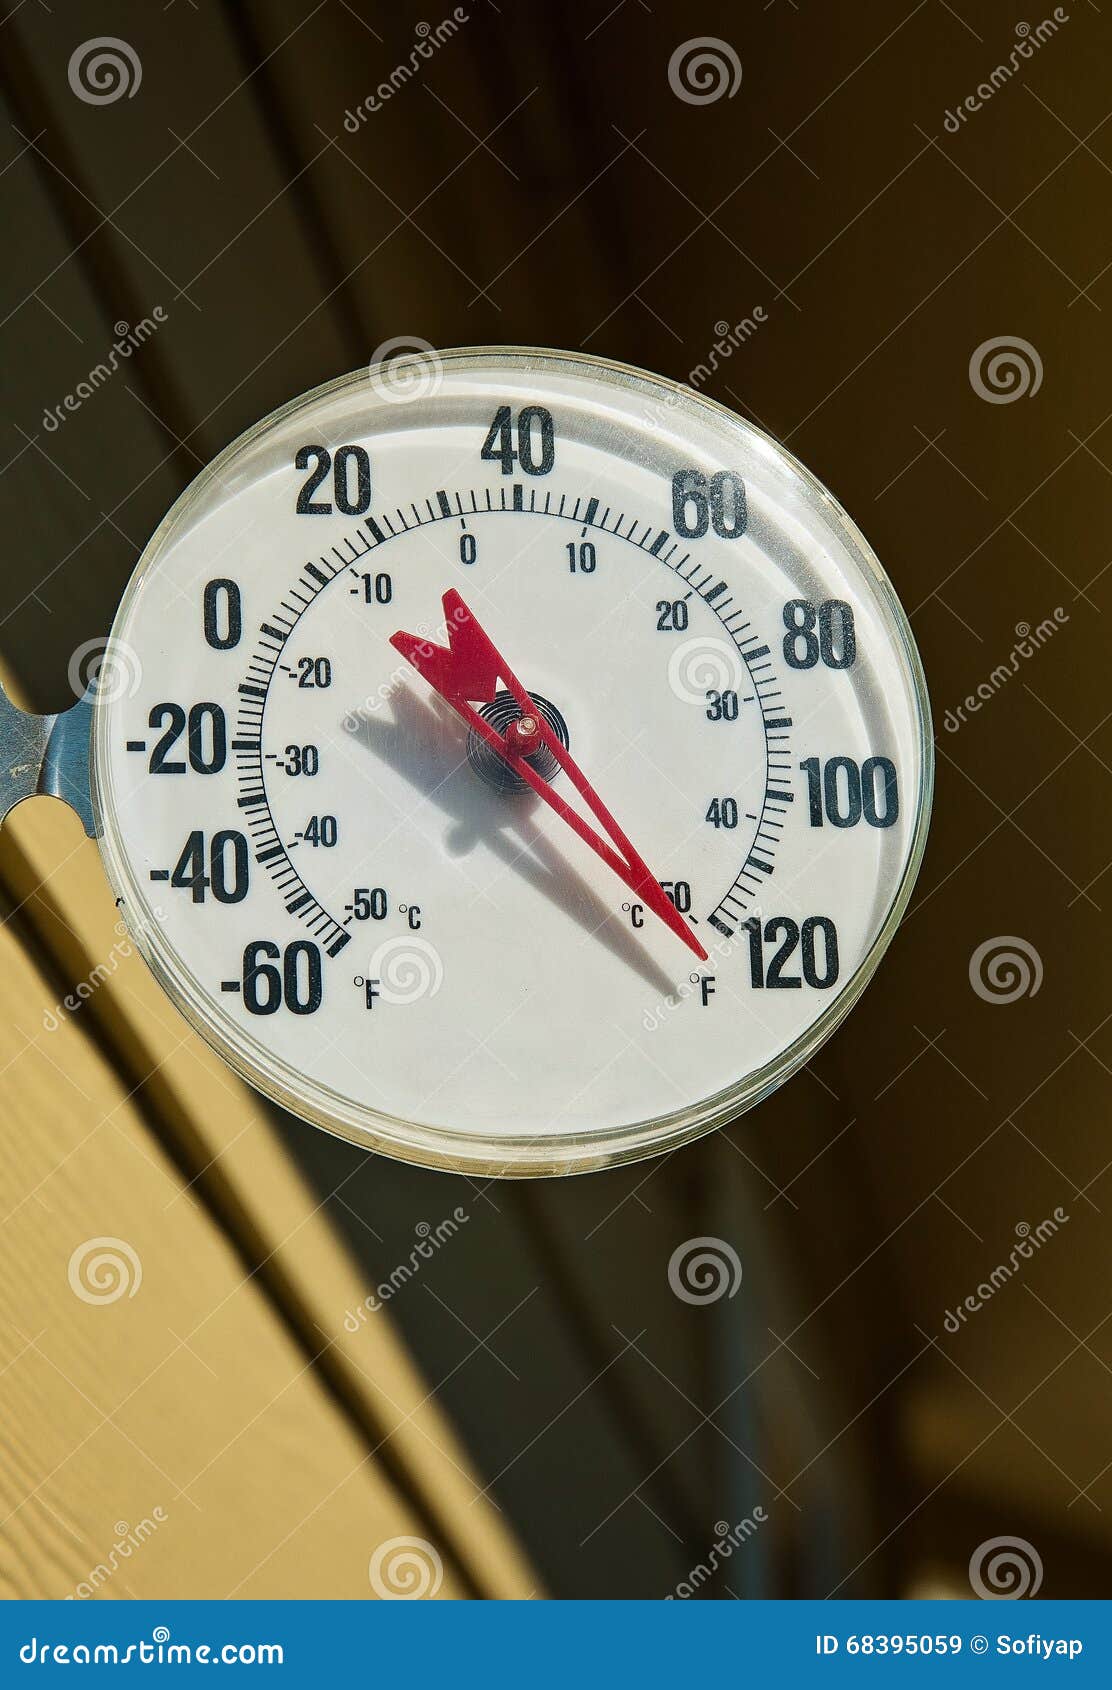 https://thumbs.dreamstime.com/z/outdoor-thermometer-showing-unusually-hot-summer-temperature-temperatures-fahrenheit-68395059.jpg